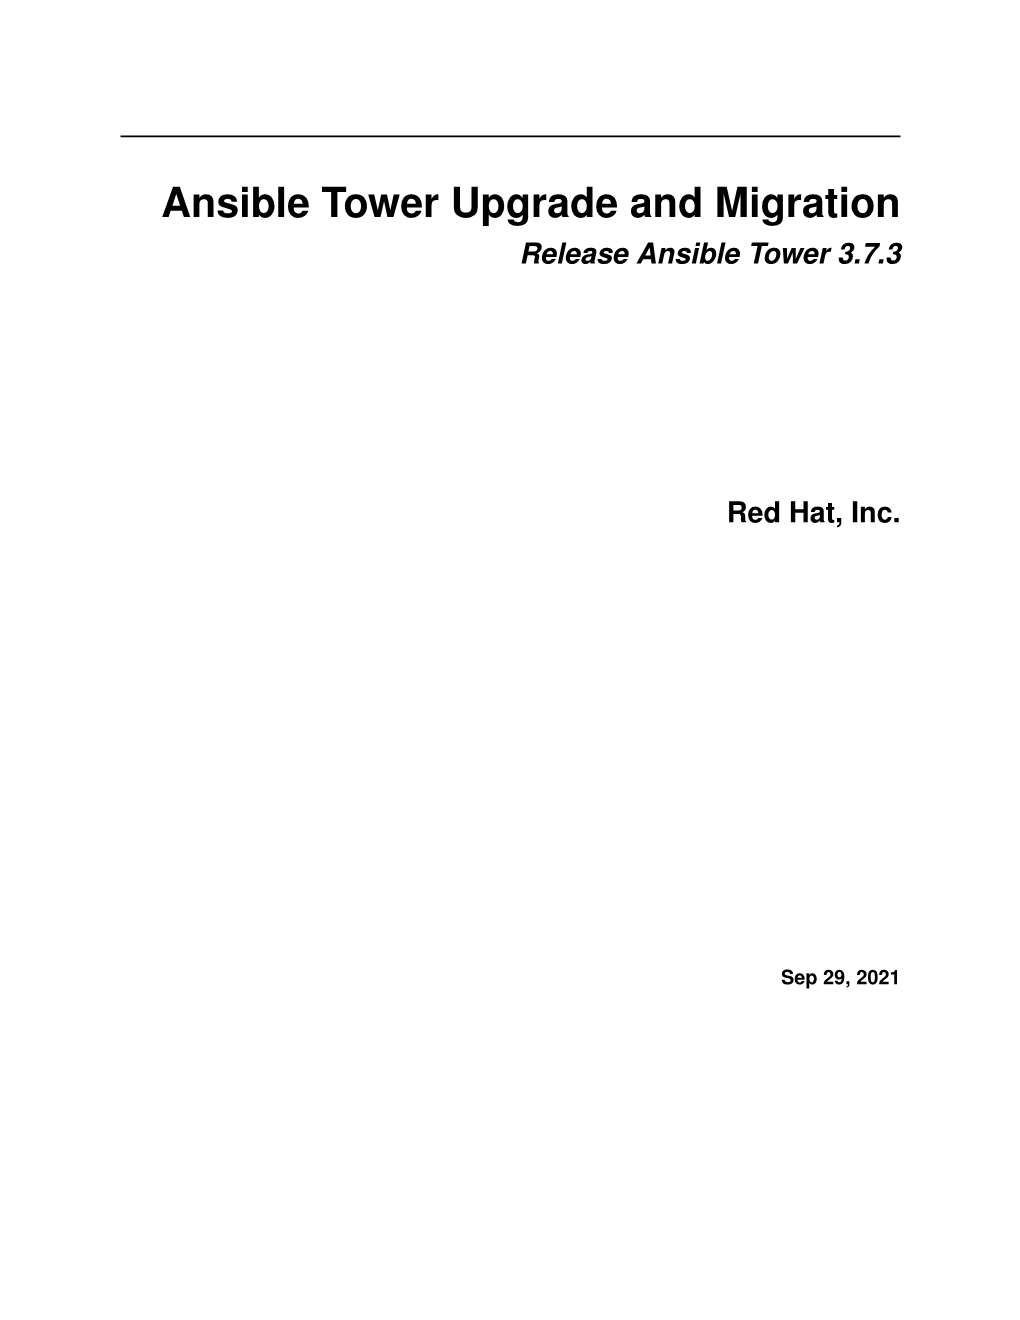 Ansible Tower Upgrade and Migration Release Ansible Tower 3.7.3